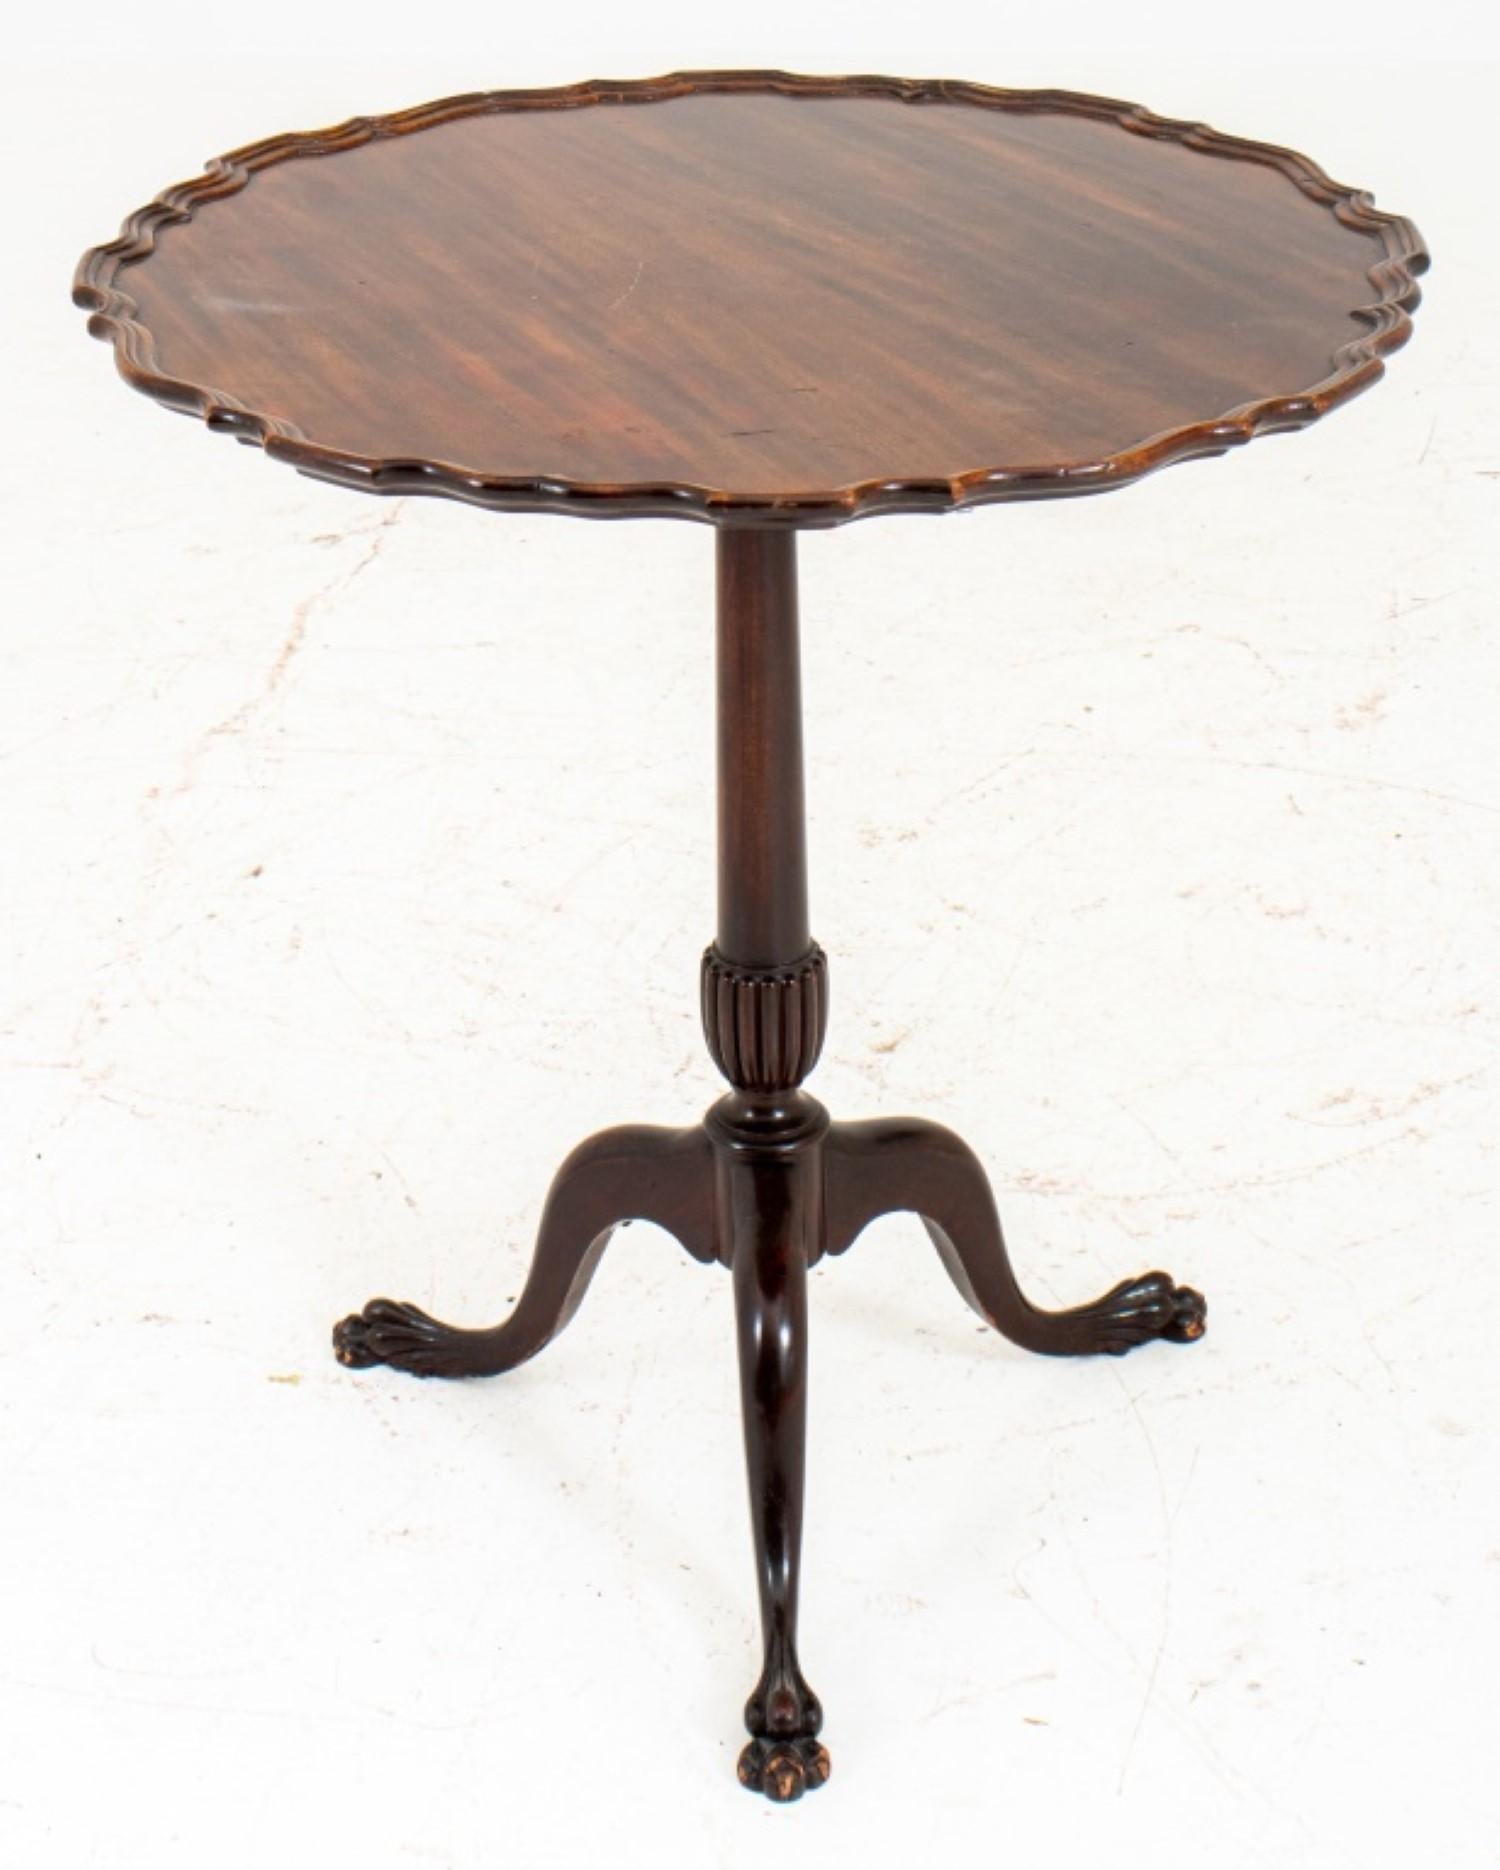  George III Style mahogany piecrust tripod table. Here are the details:

Style: George III
Material: Mahogany
Features:
Shaped circular top with a piecrust edge
Tilt mechanism
Faceted gadrooned shaft
Tri-pedal base
Elongated hairy paw